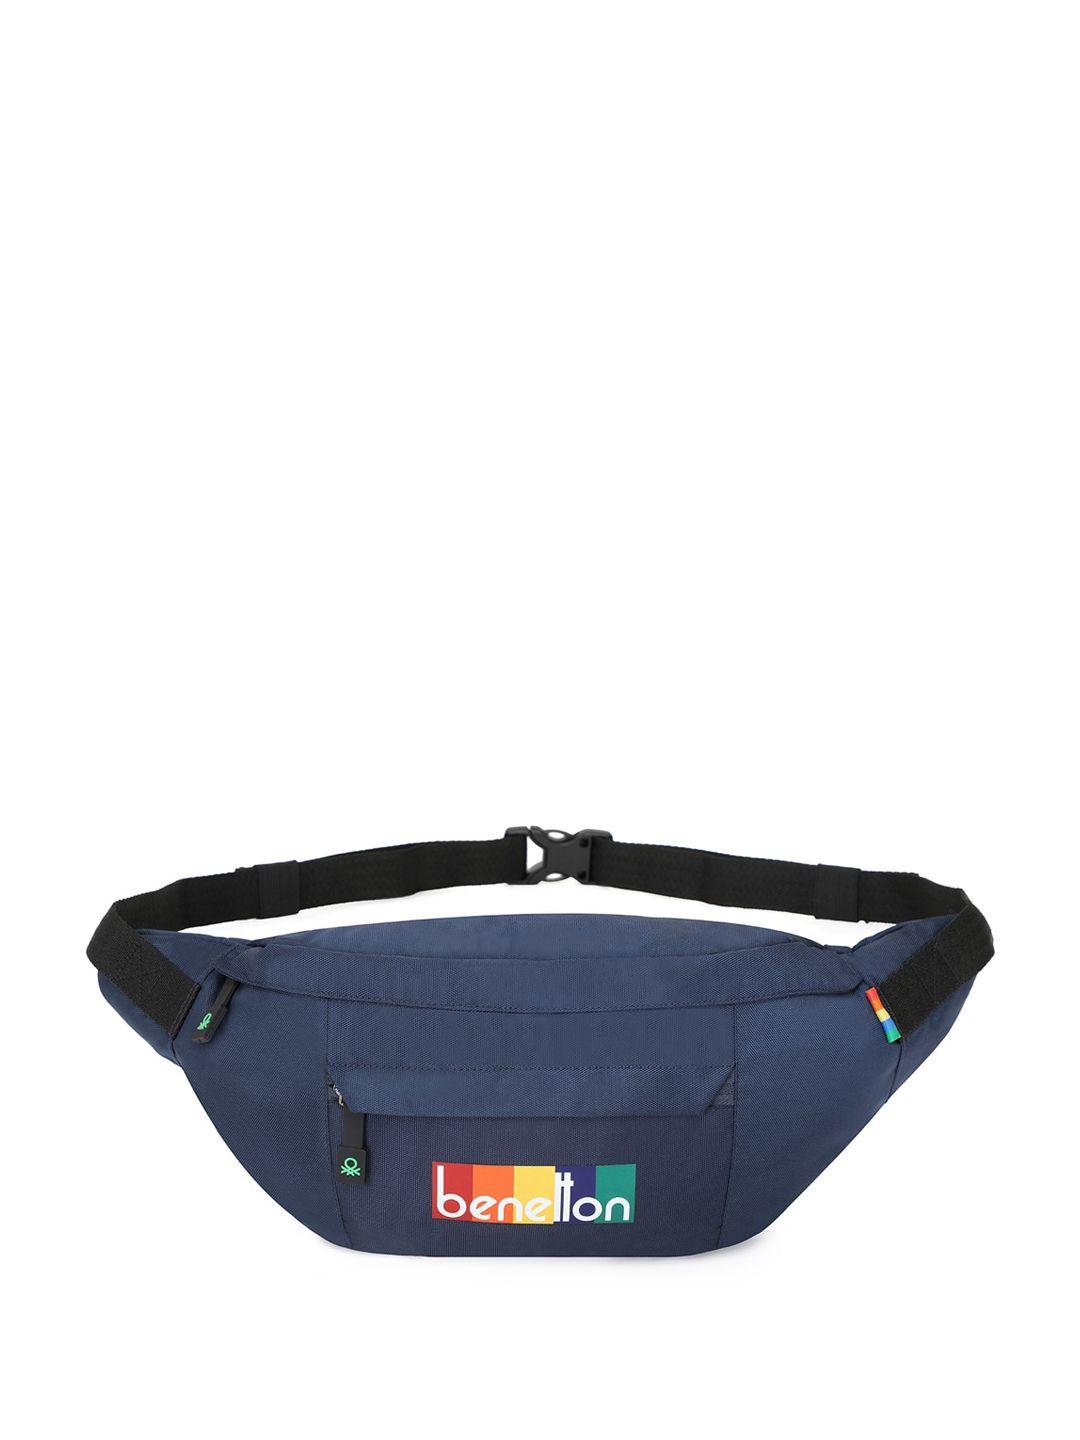 united colors of benetton unisex textured travel pouch